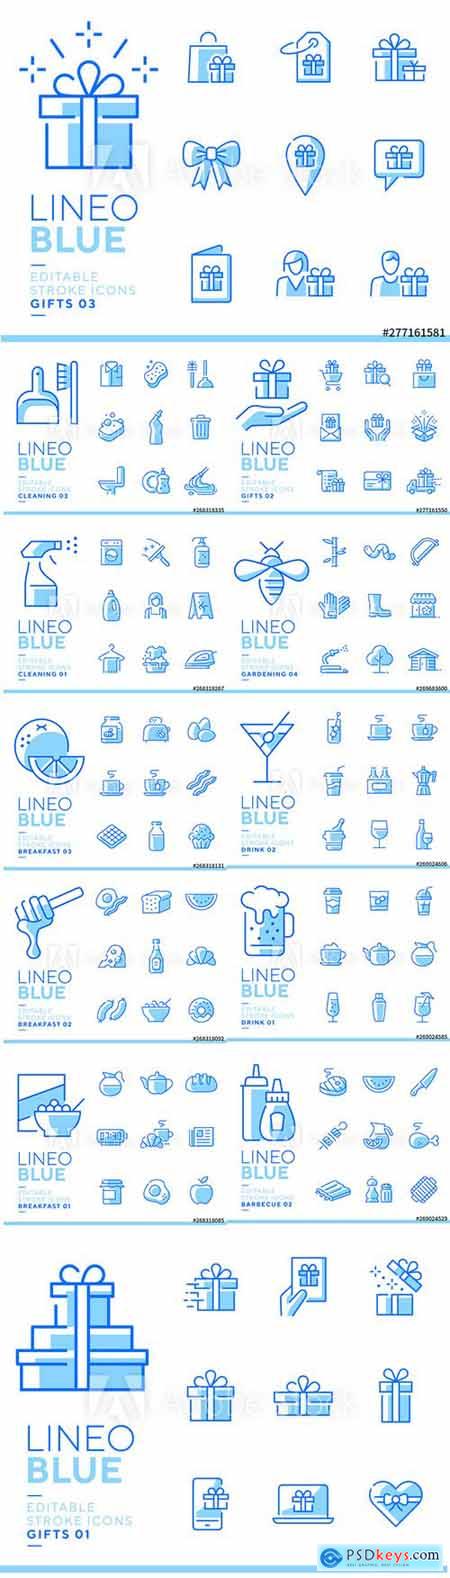 Lineo Blue - Line Icons Pack Vol 4